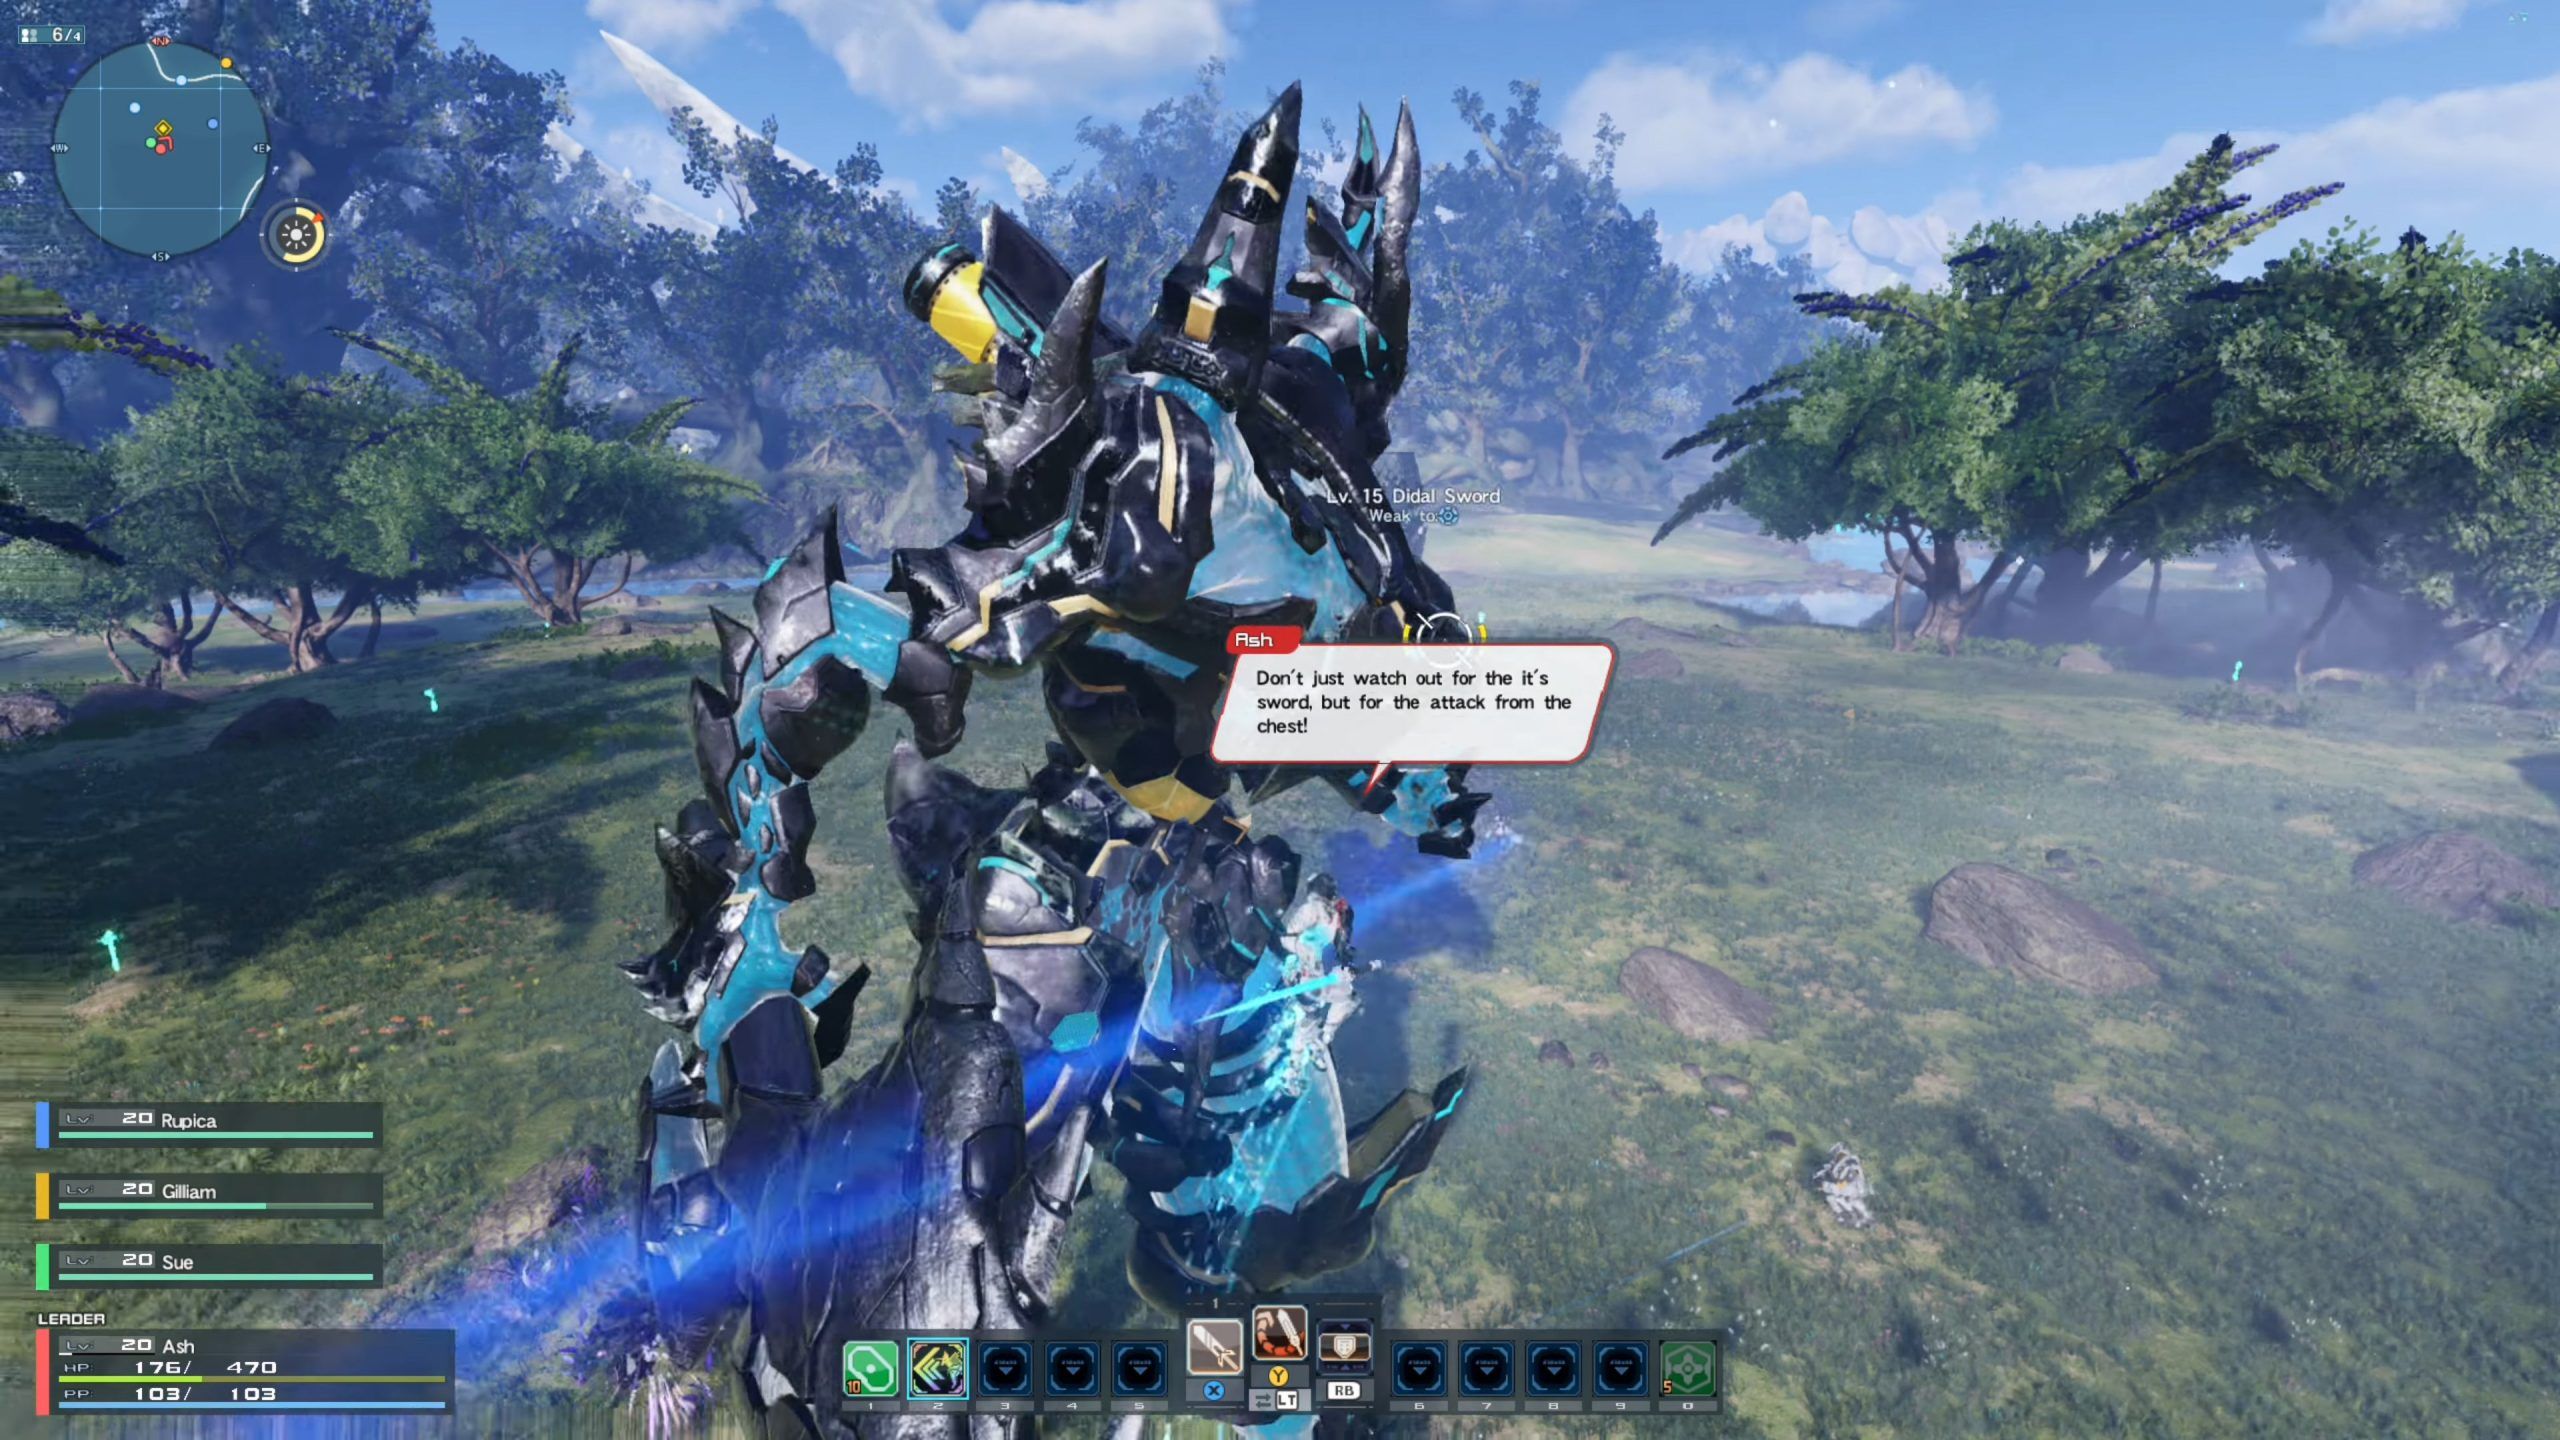 Phantasy Star Online 2: New Genesis Announced for PCBOX 1